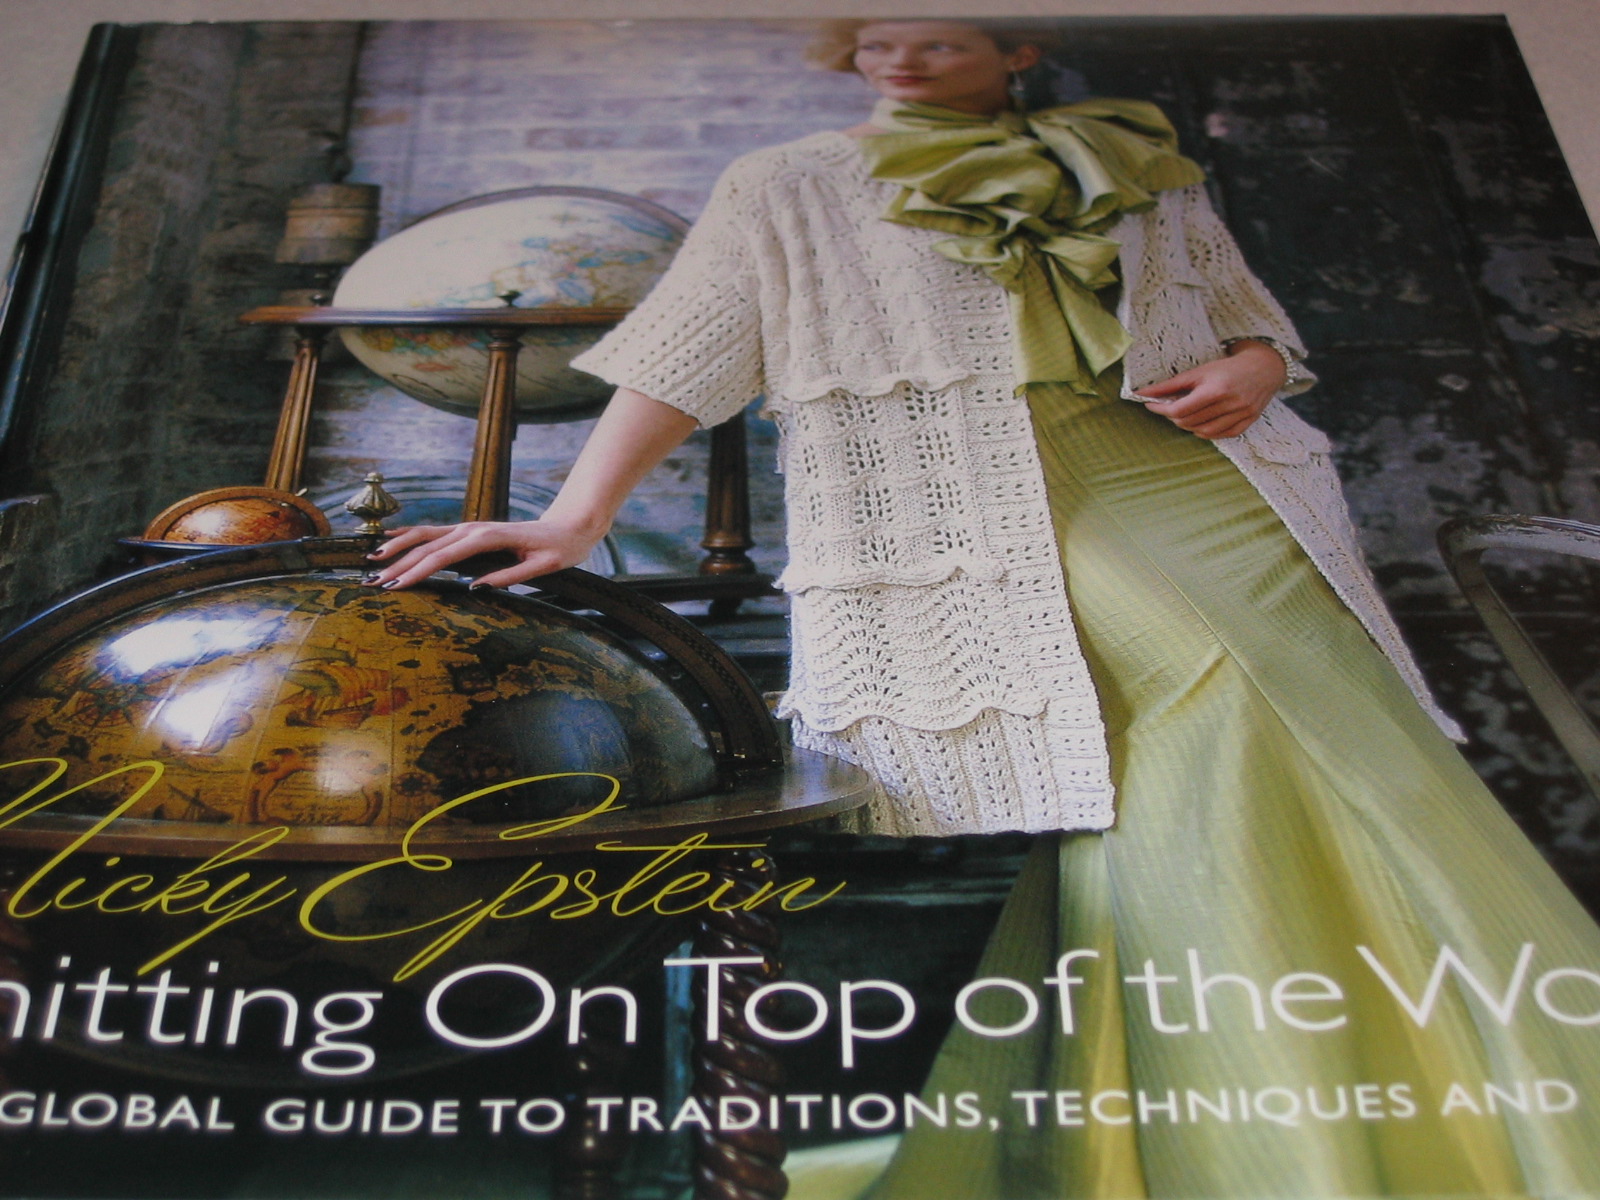 [Knitting+on+Top+of+the+World+by+Nicky+Epstien.JPG]